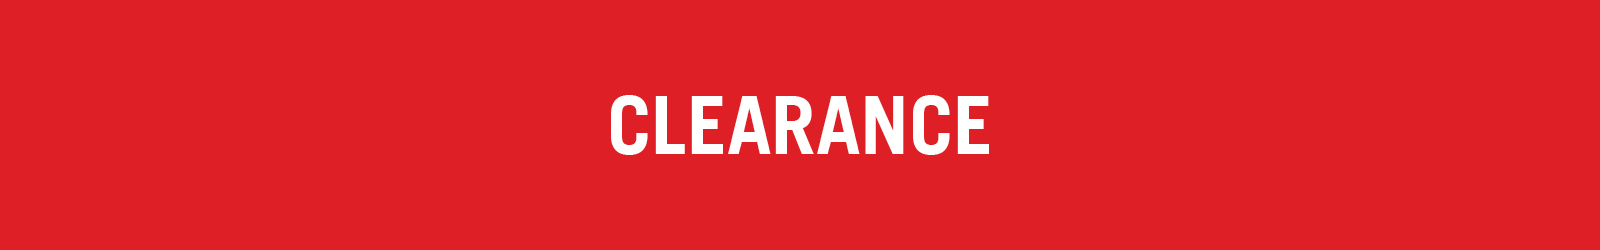 Clearance Books - General